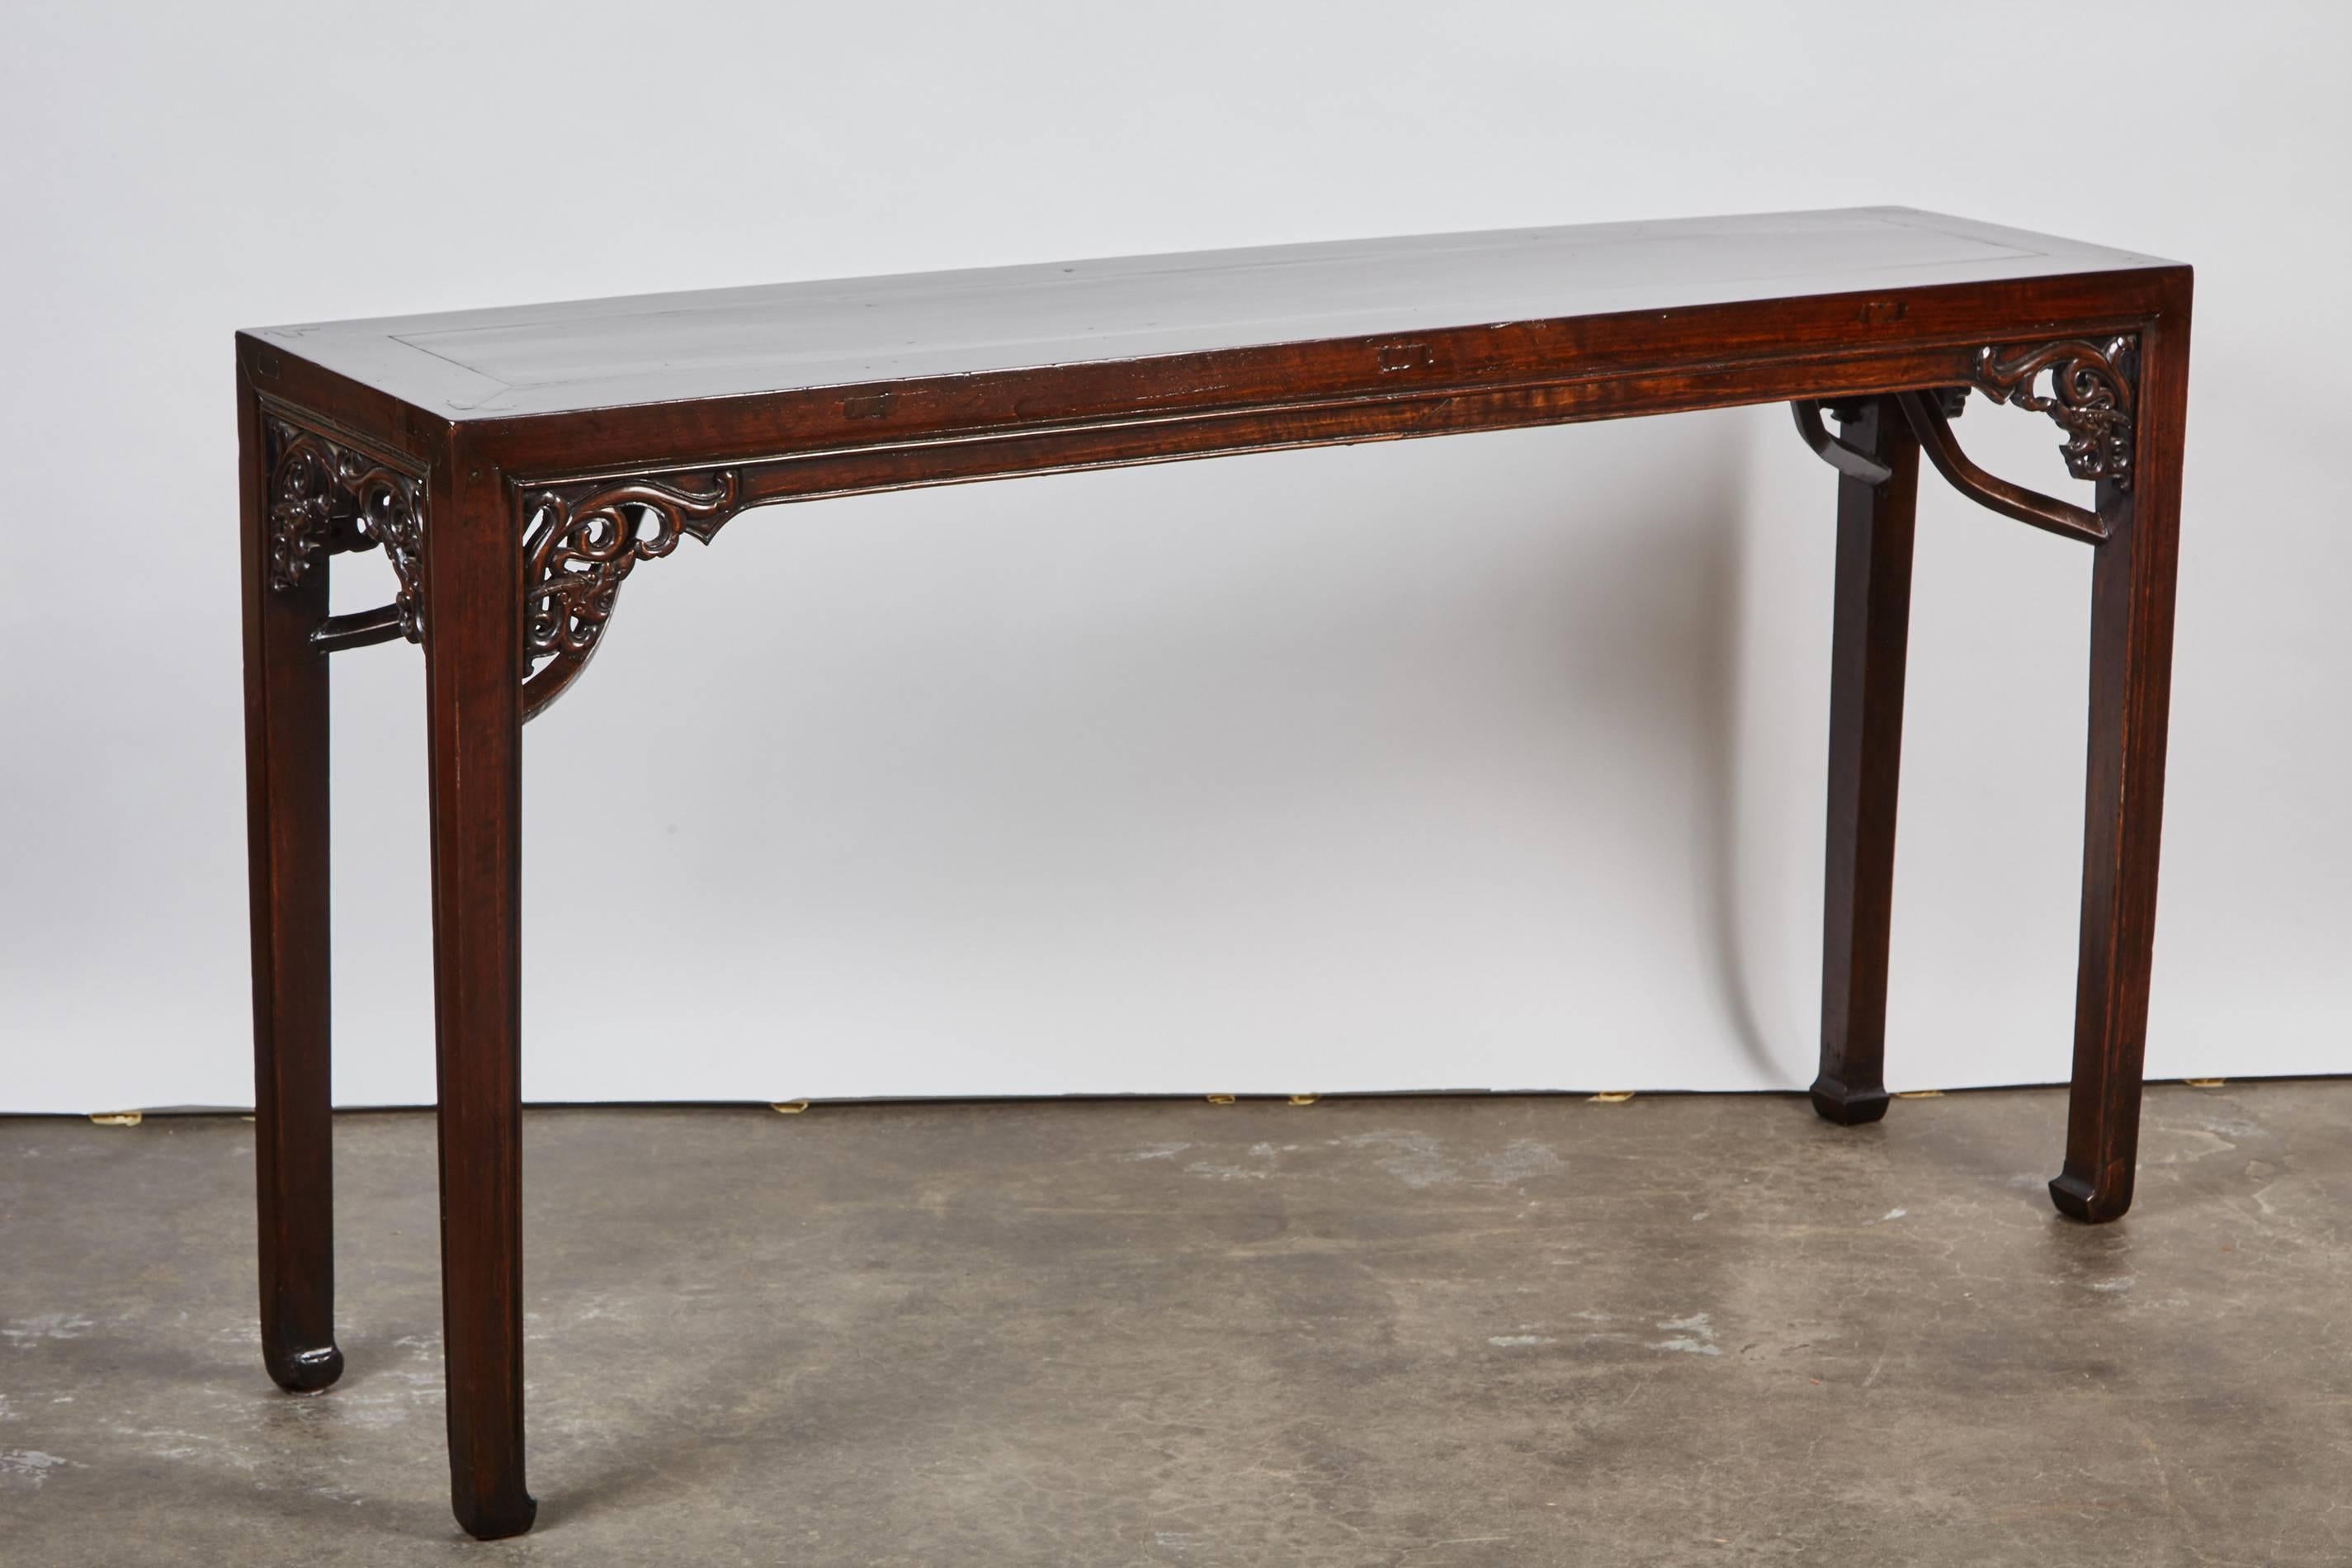 Rare 18th century Qing dynasty small walnut altar table with under braces and refined carving from Shanxi, China.